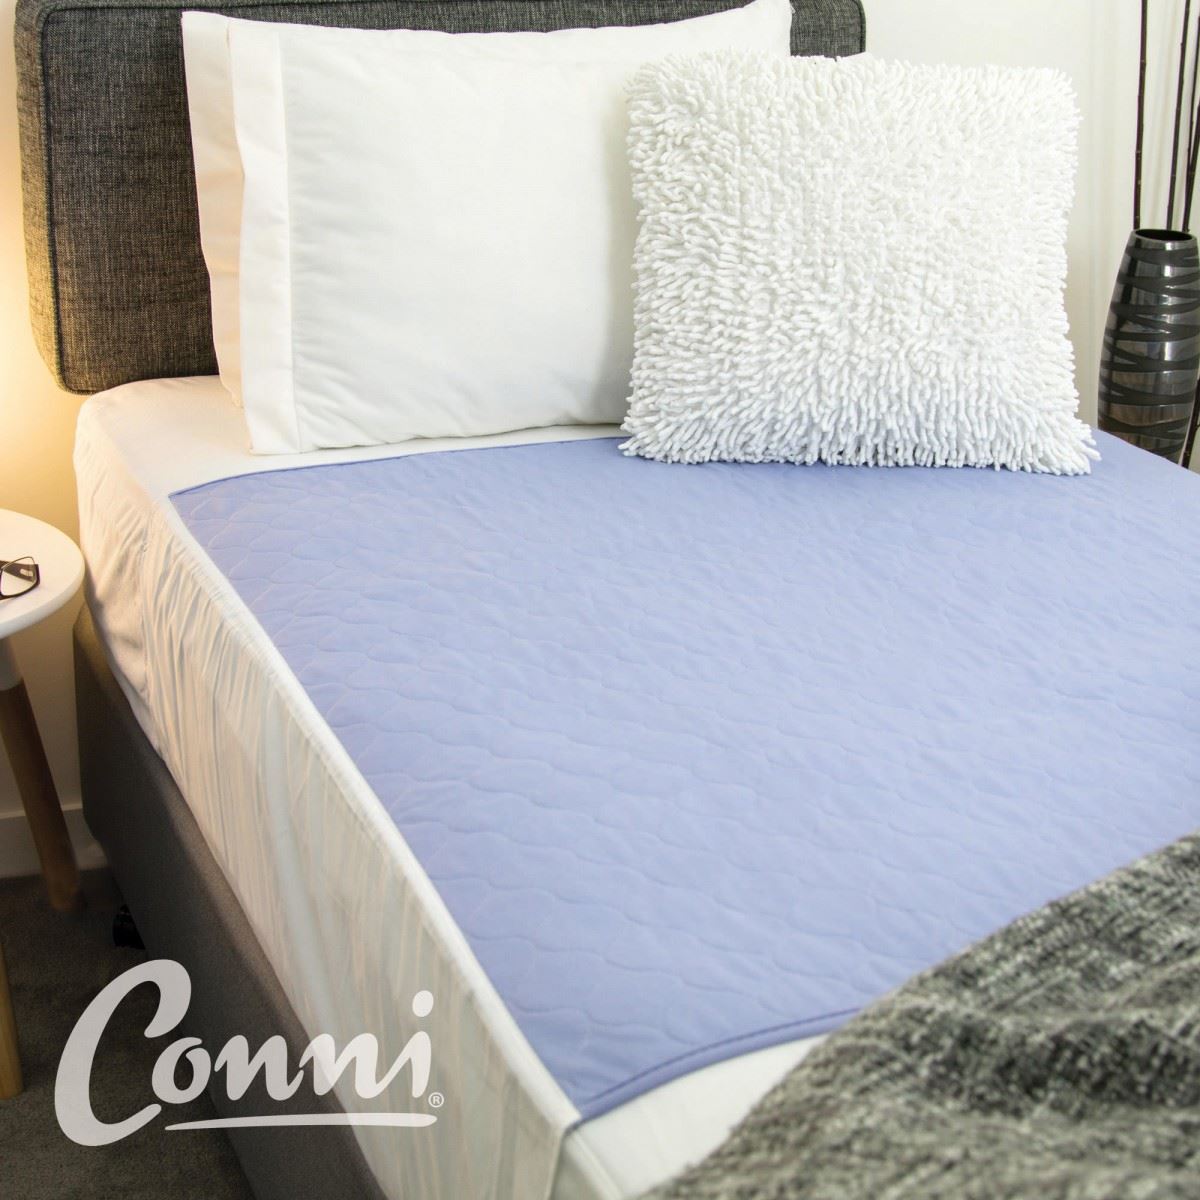 Picture of Conni Kids Bed Pad with Tuck-ins